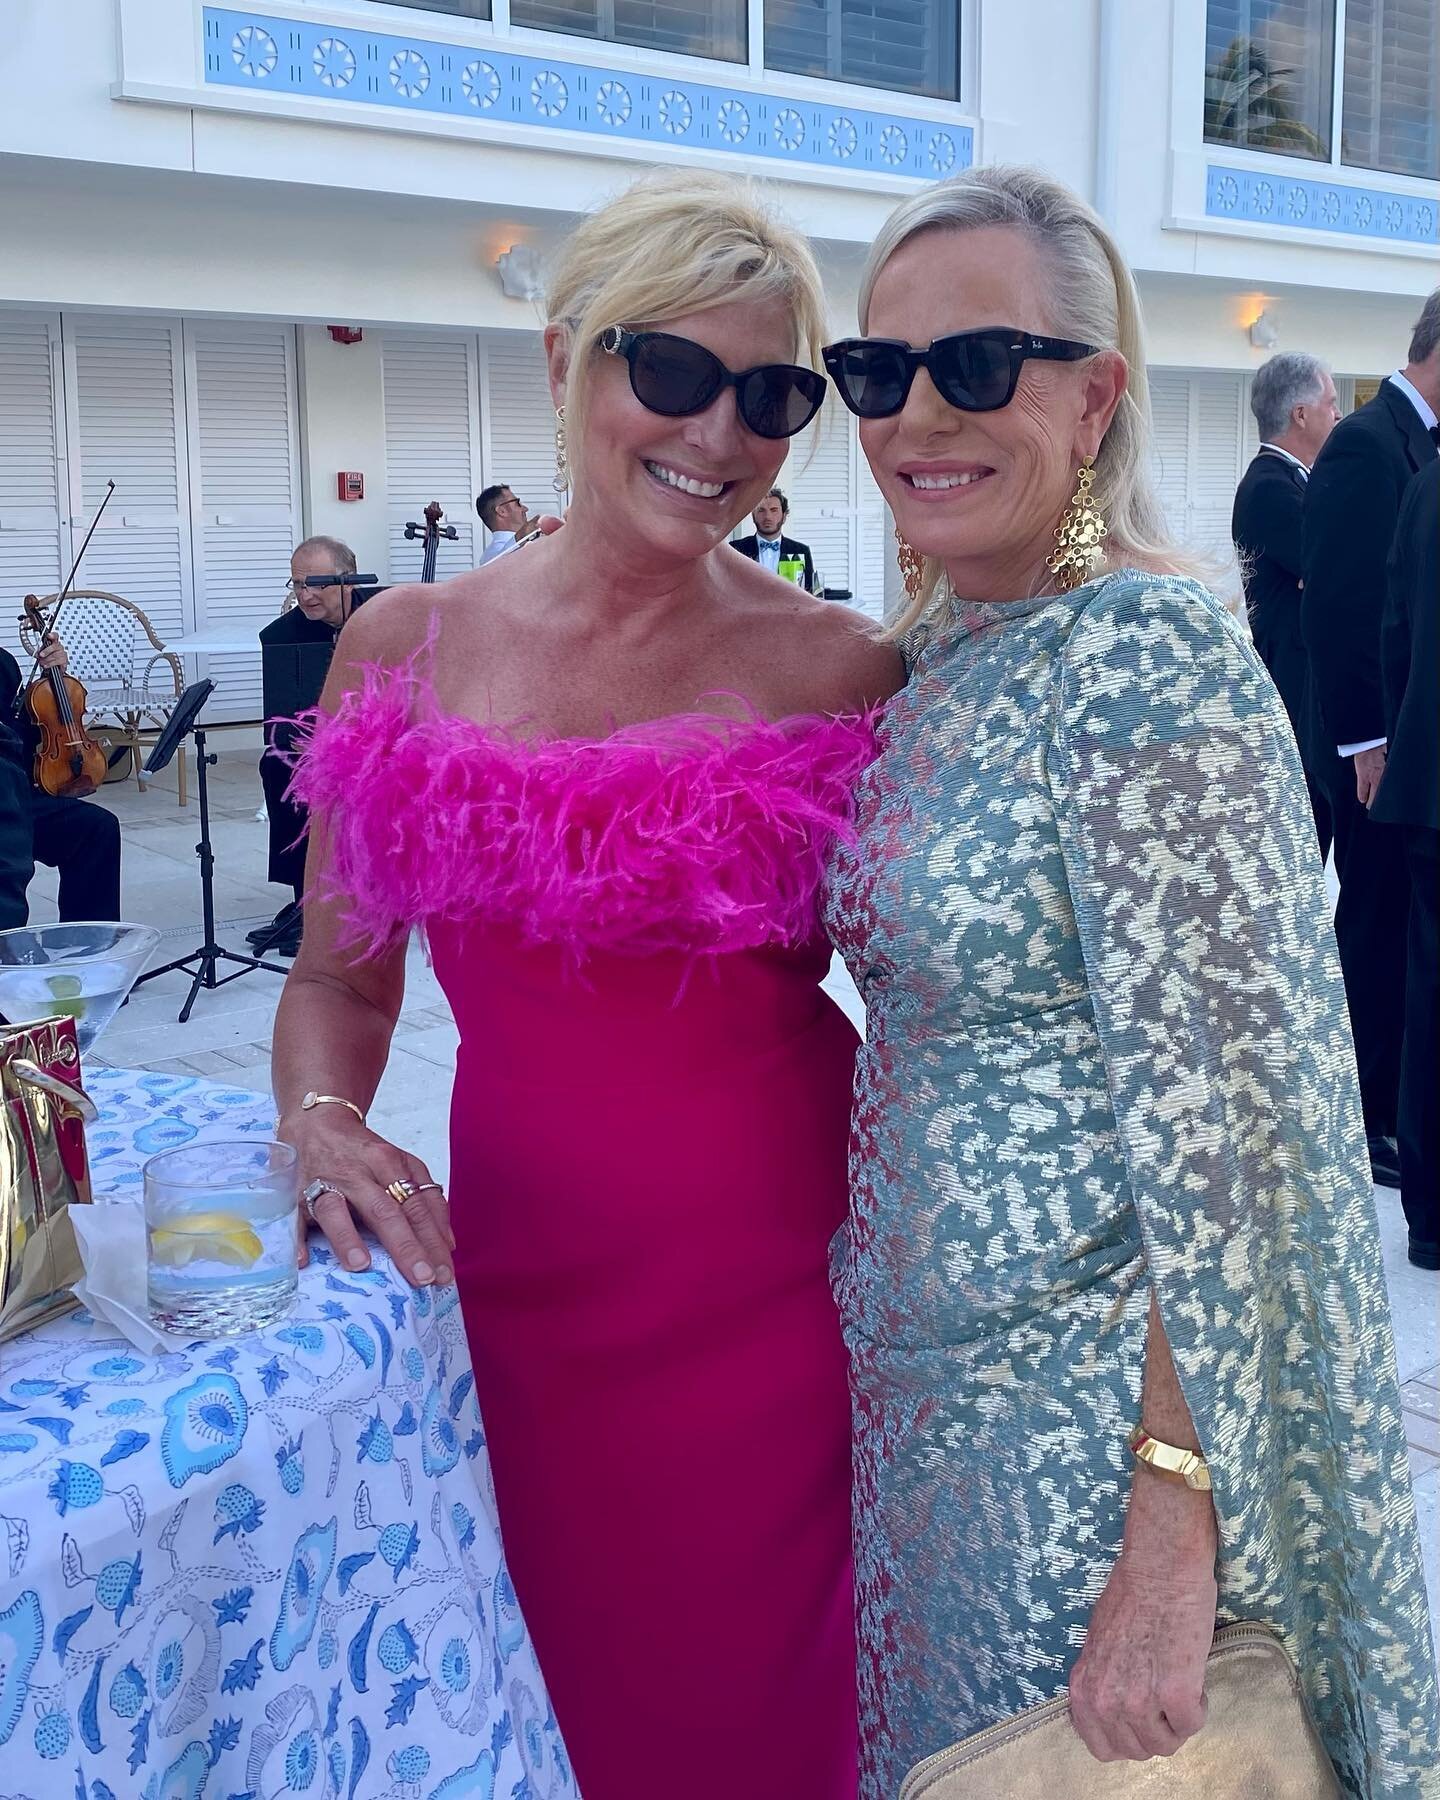 The most beautiful mother of the bride on the right, @mmo_michelle and her beautiful sister-in-law, @lisa.otremba last night. One of the most spectacular weddings on the edge of the ocean I've ever been to! There is nothing this talented mother can n